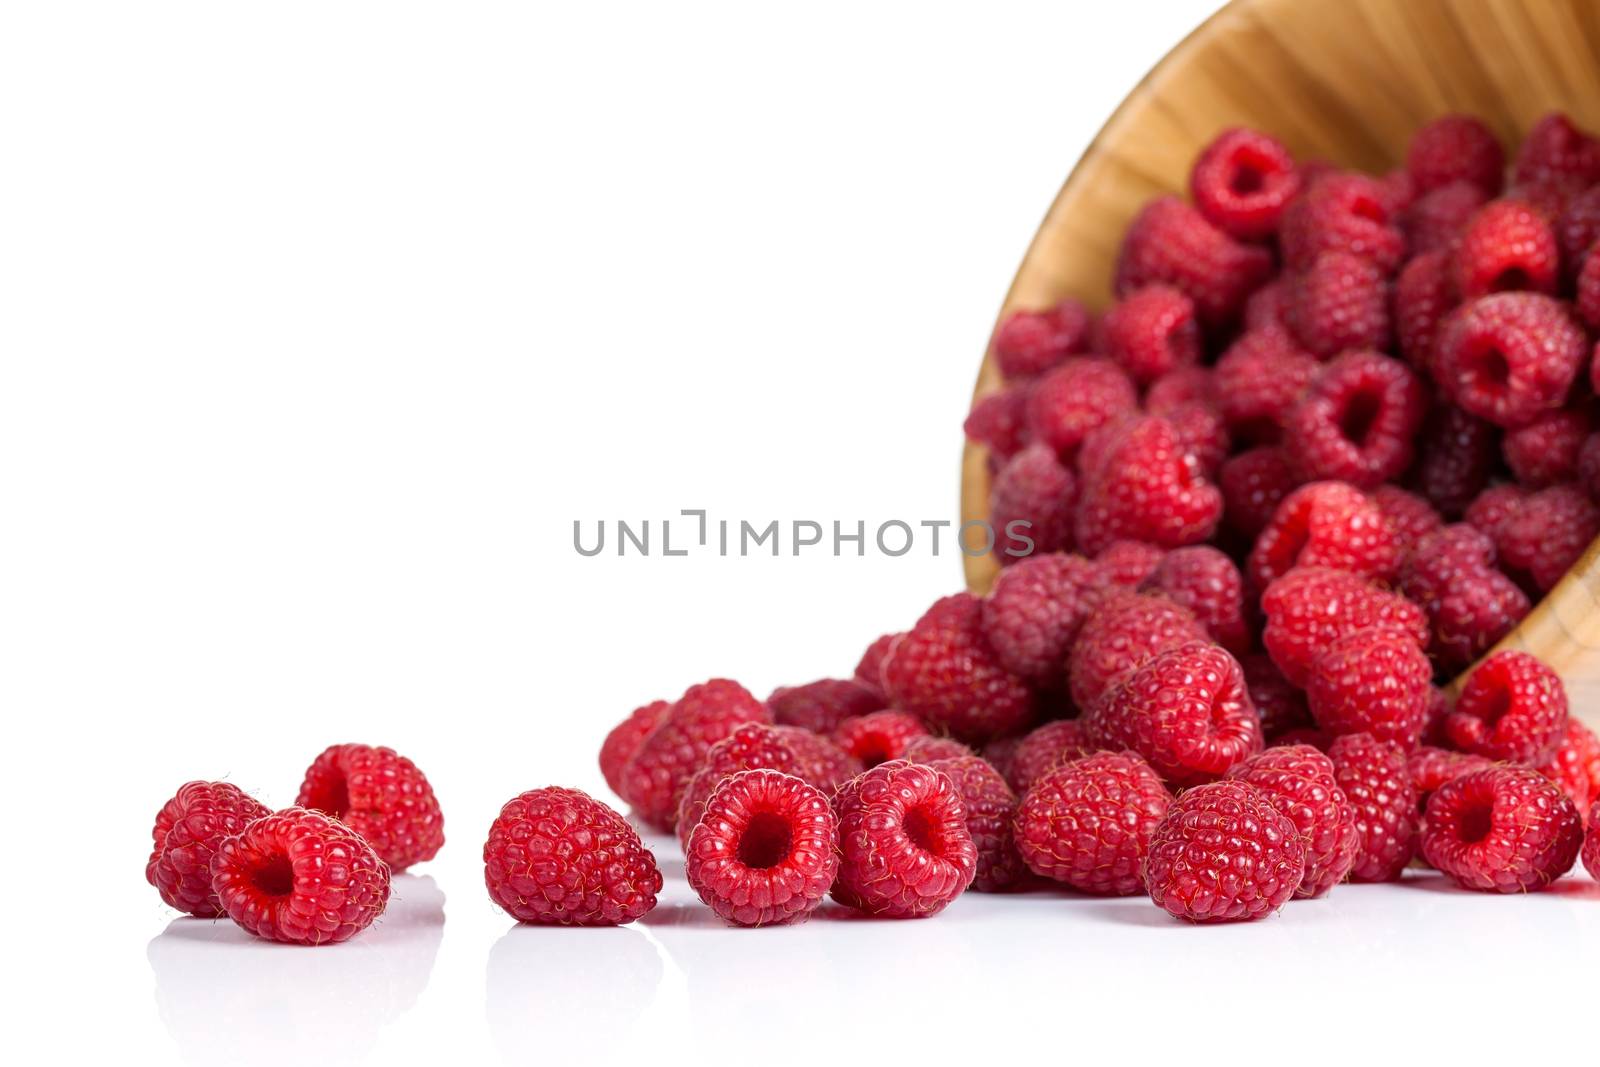 Raspberries in wooden bowl on white background